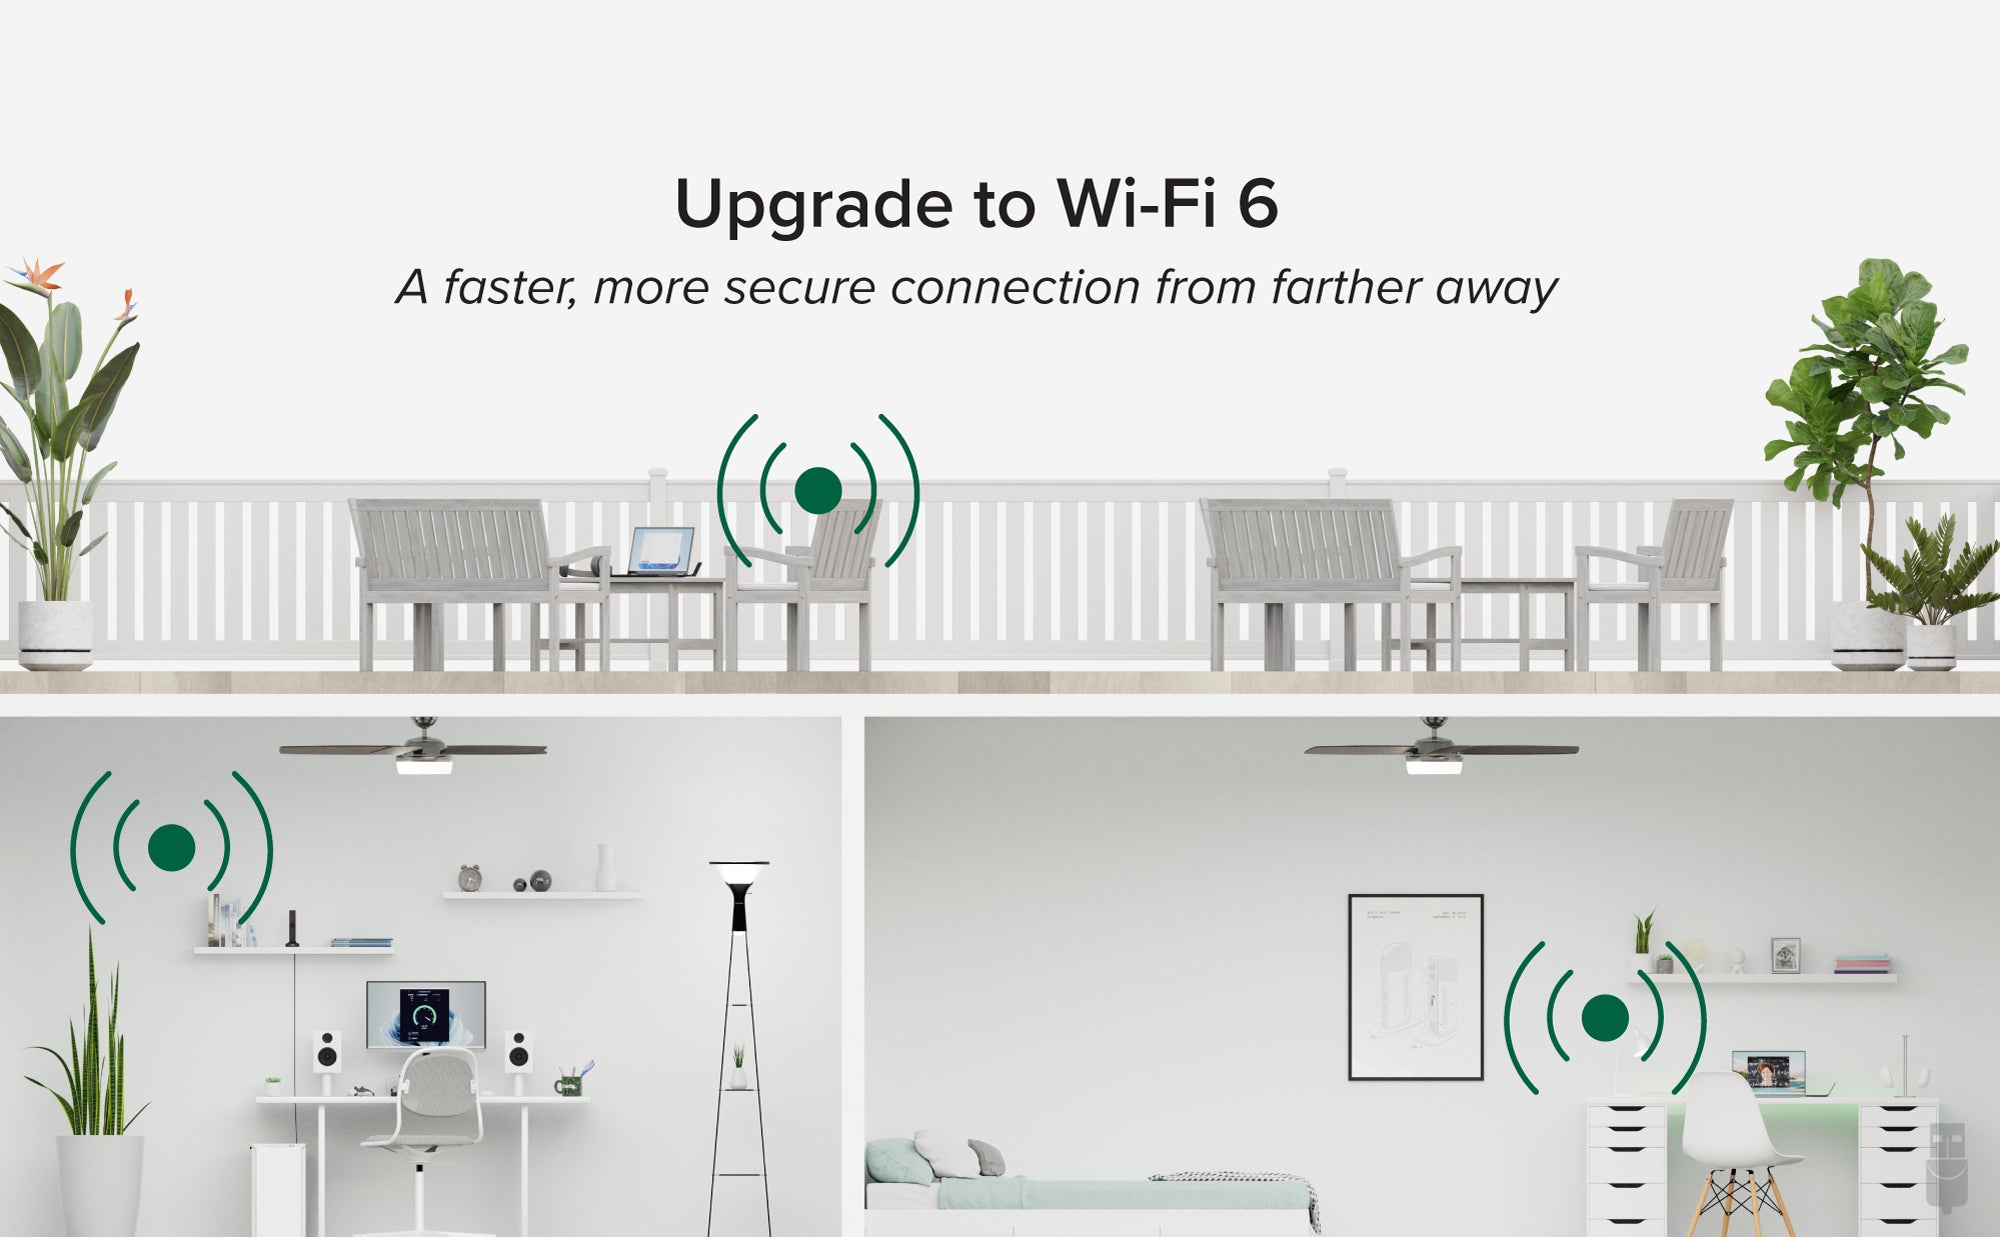 A visual of a house showing wi-fi signals throughout different rooms.